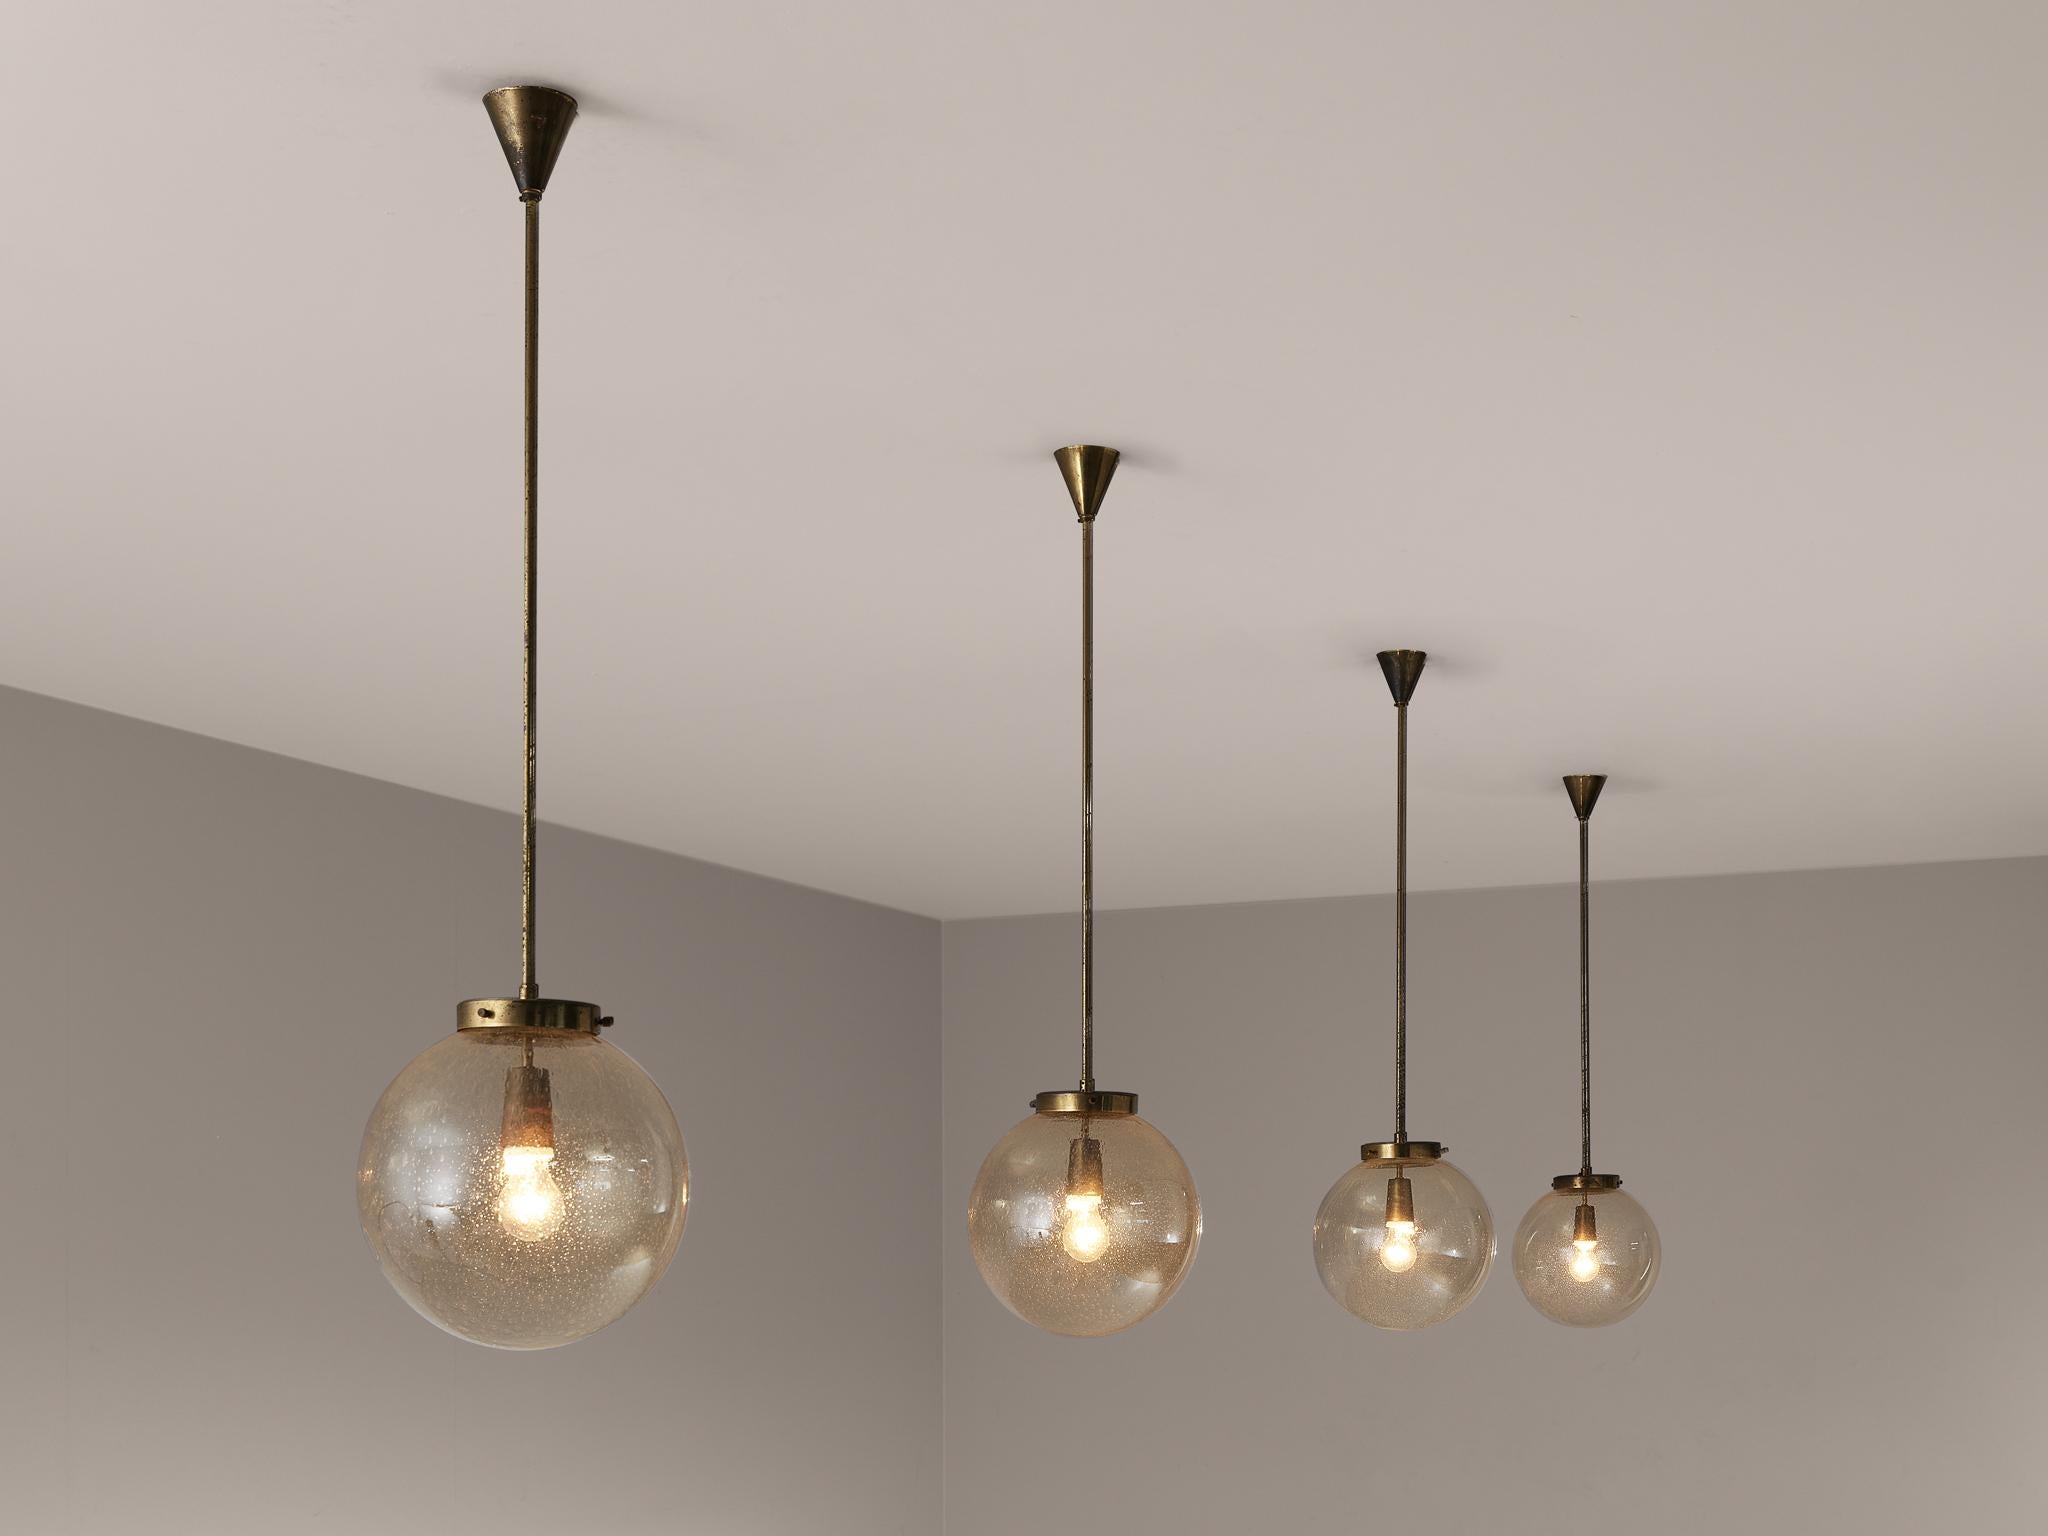 Pendants, glass, brass, Germany, 1960s.

This set of pendants features a smoked hand-blown glass orb. As a result of the hand-blown production technique, multiple bubbles are visible in the glass orb. It not only gives the shade a playful